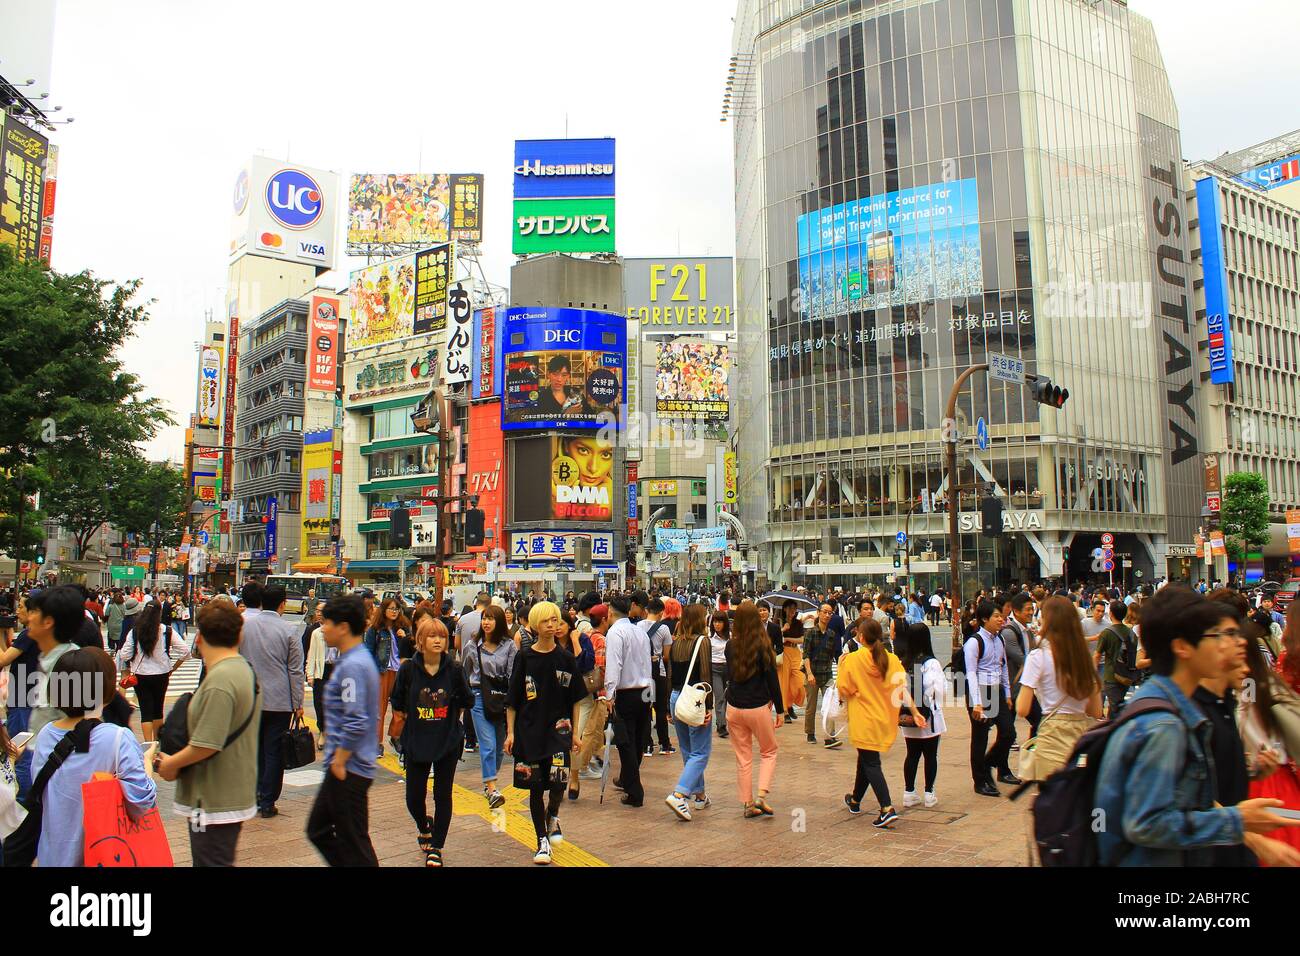 Shibuya Tokyo Japan May 30th 18 Shibuya Crossing With Lots Of Pedestrians Shibuya Crossing Is One Of The Busiest Crosswalks In The World Stock Photo Alamy